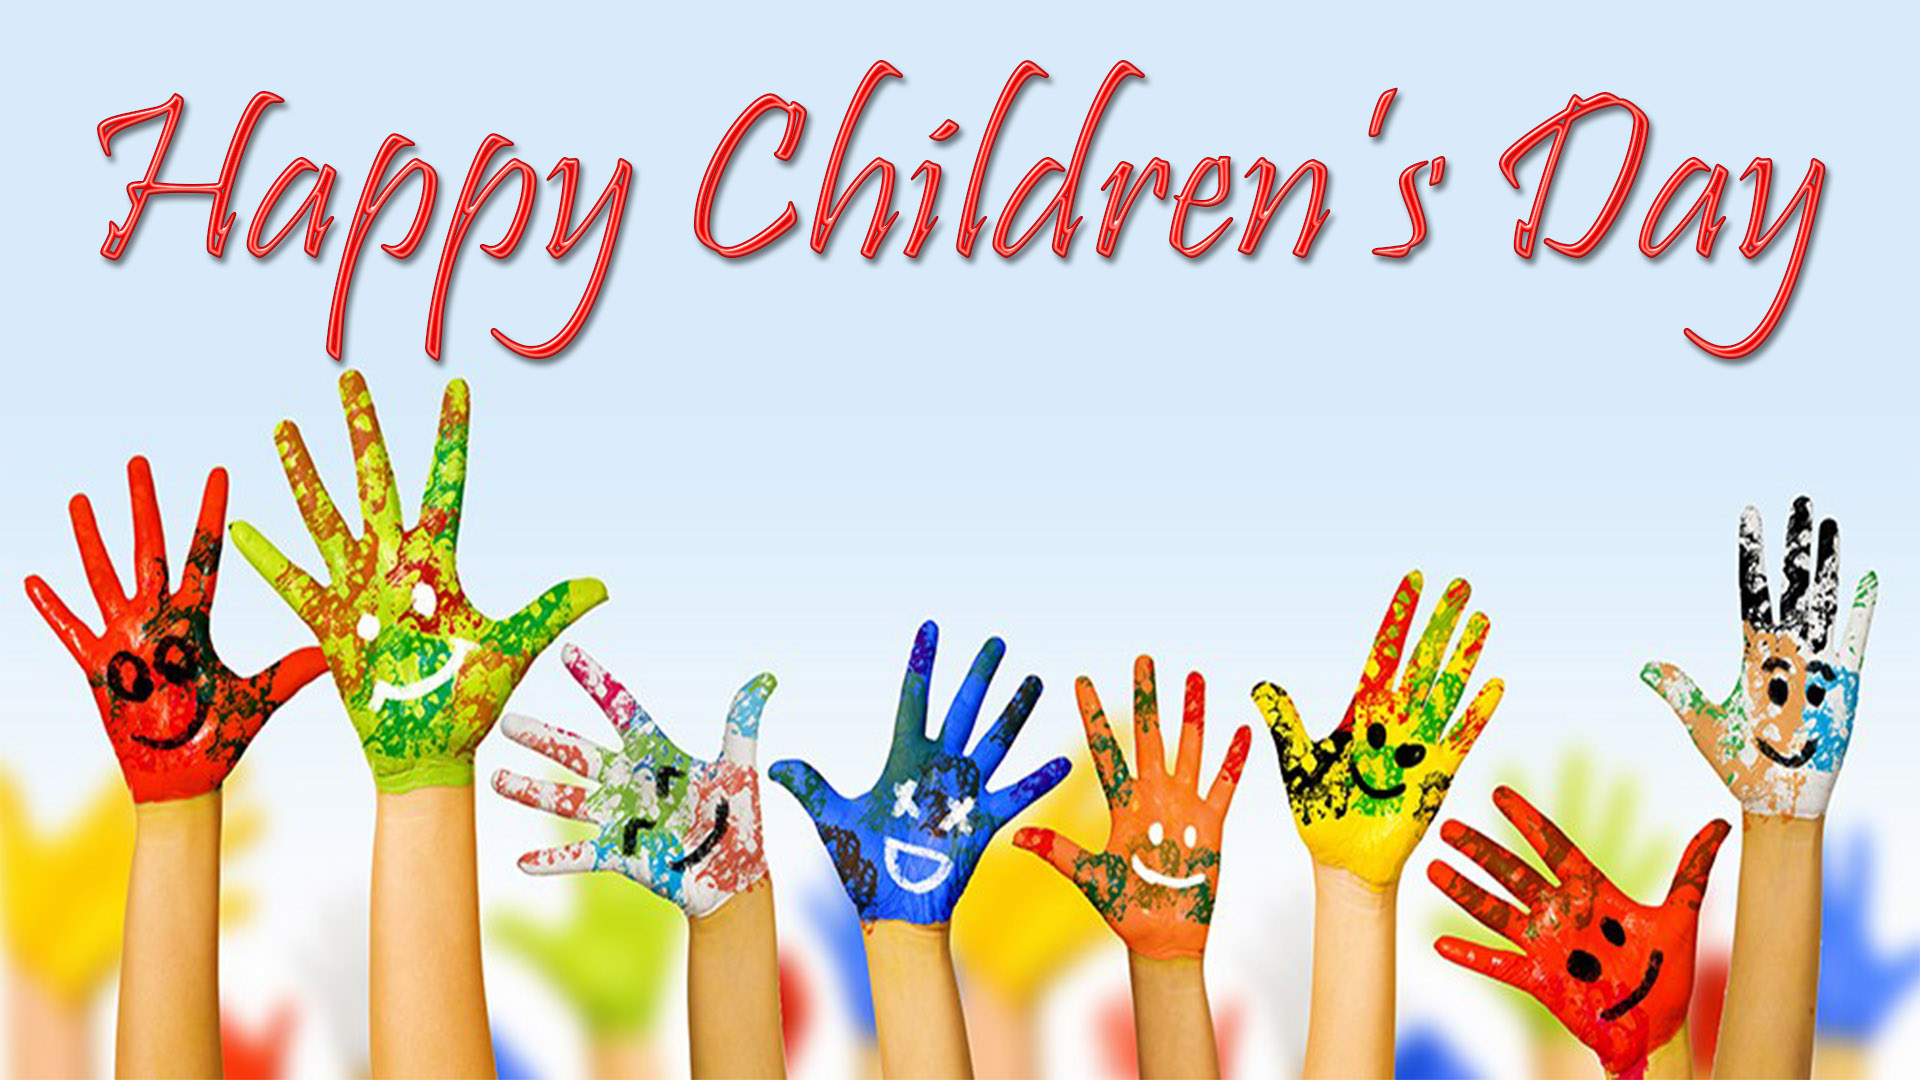 happy childrens day hd image